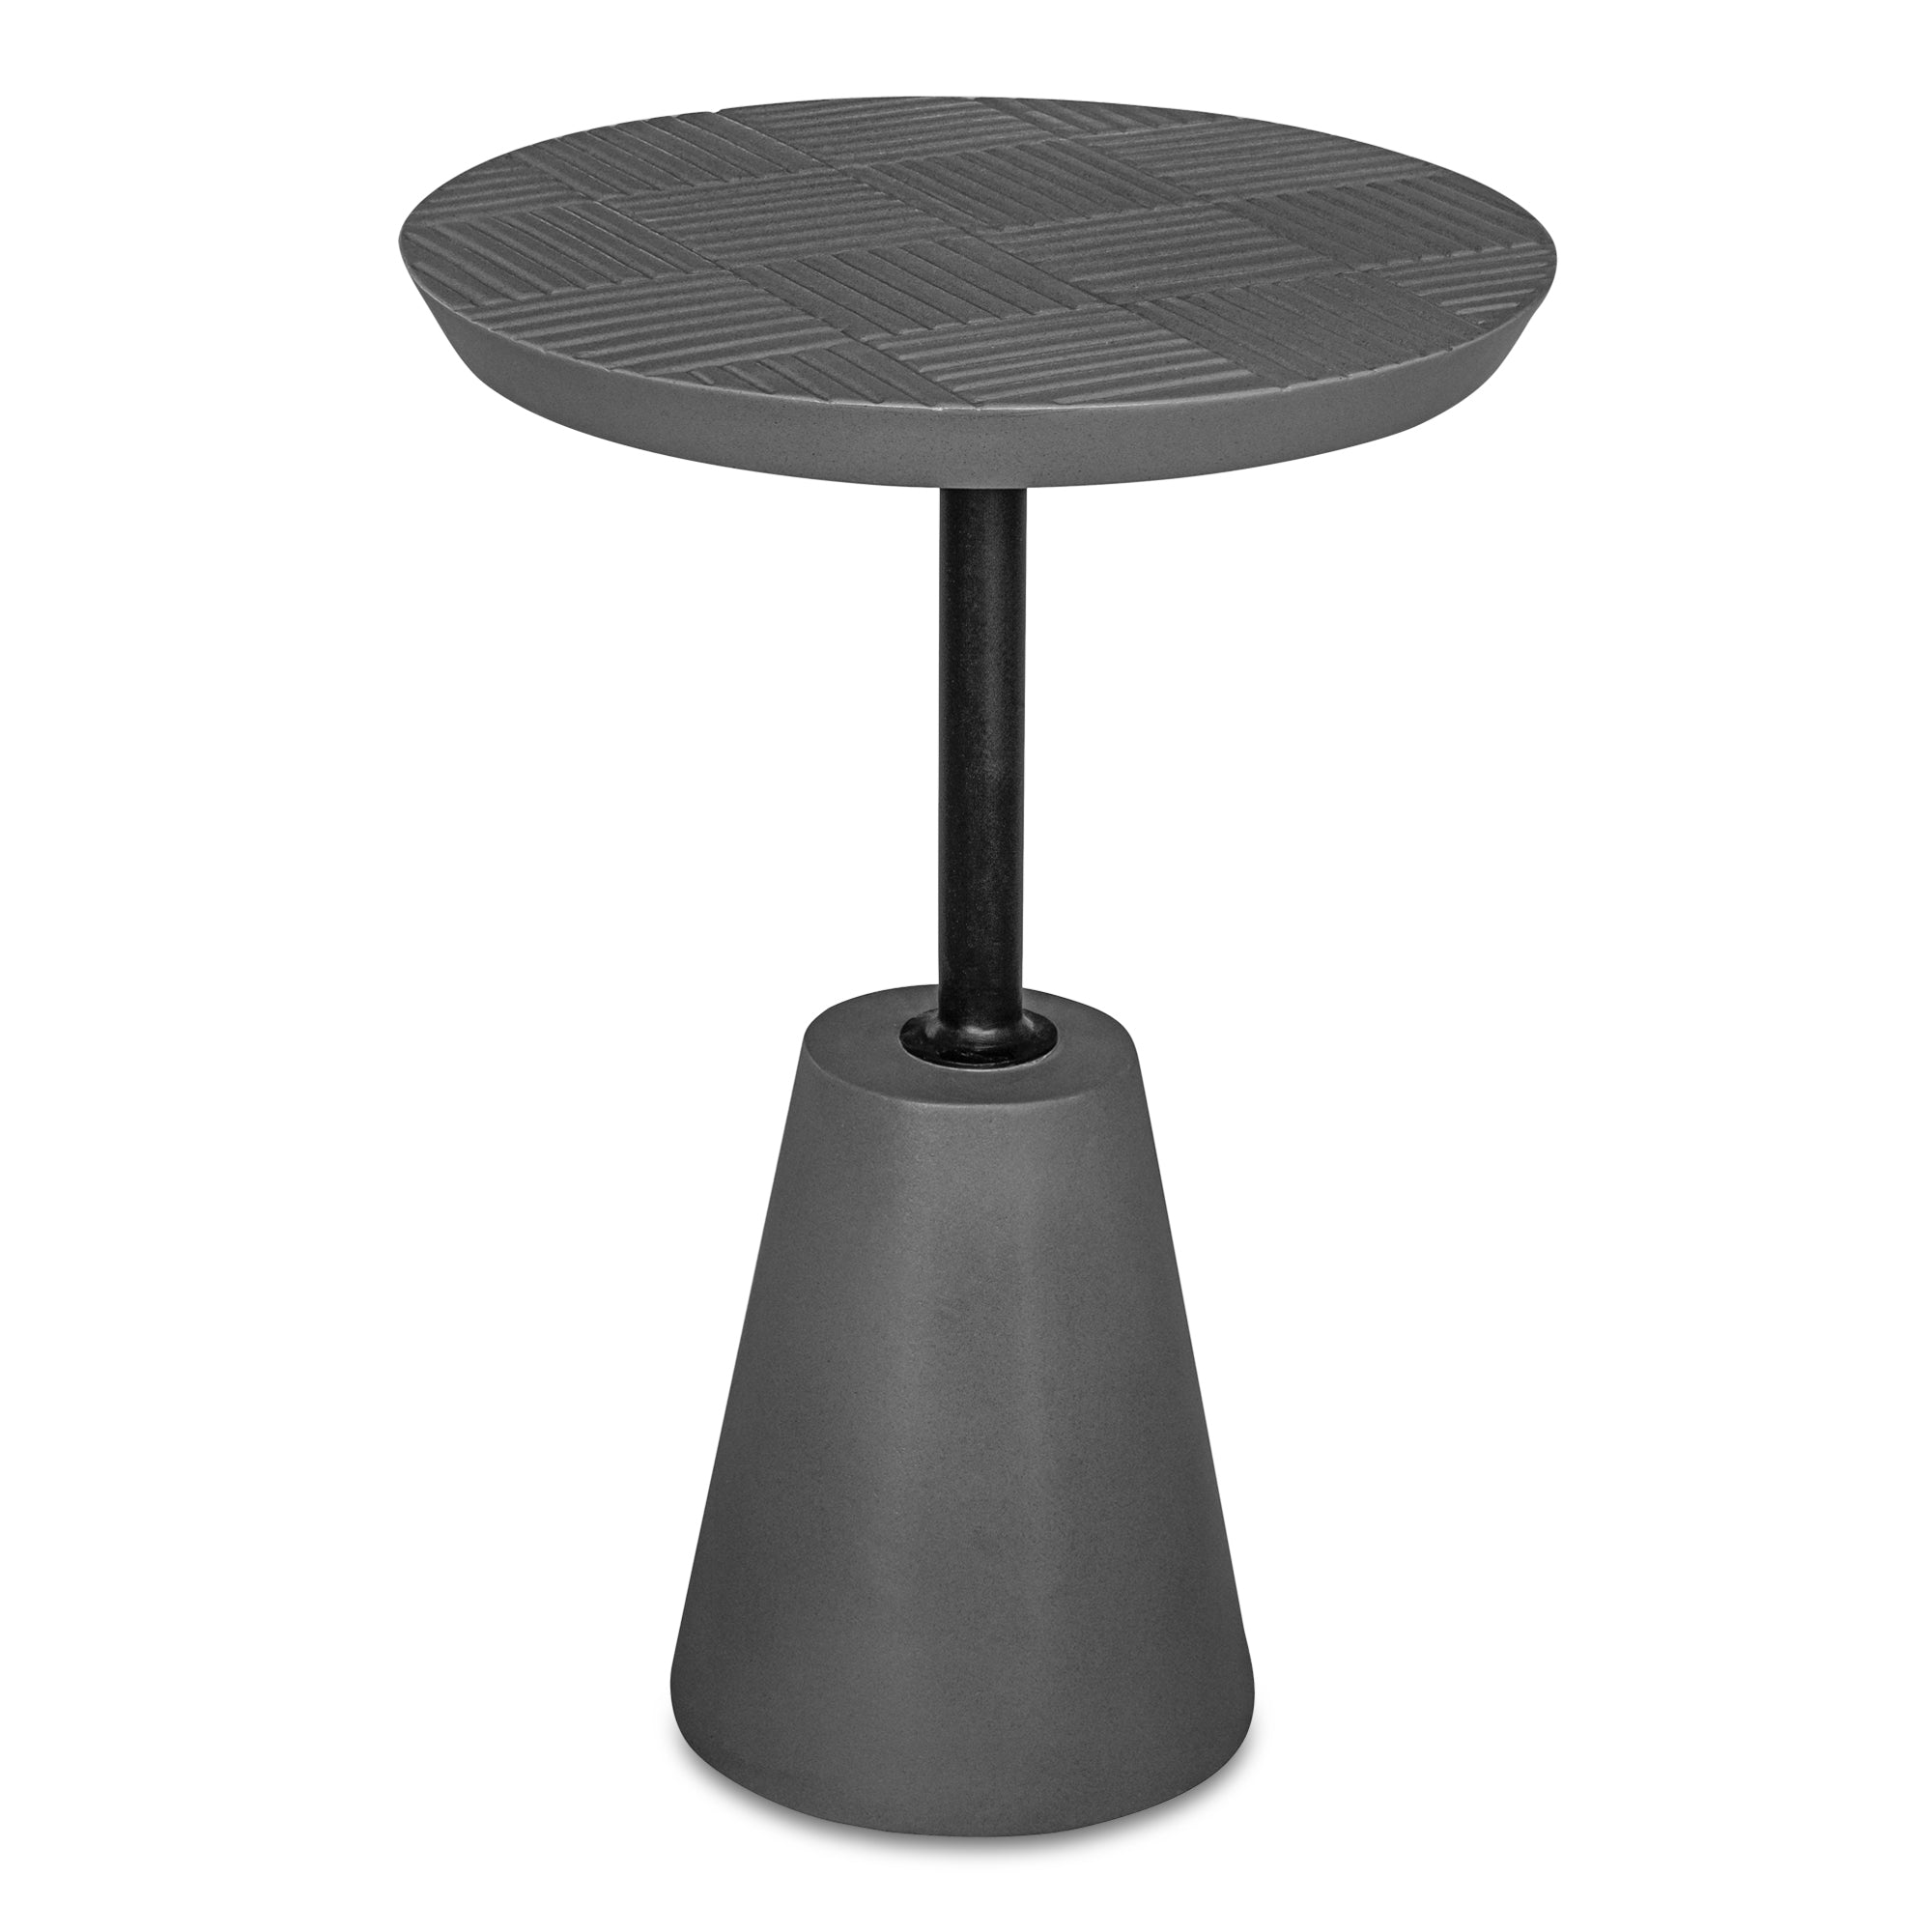 Foundation Outdoor Accent Table Dark Grey